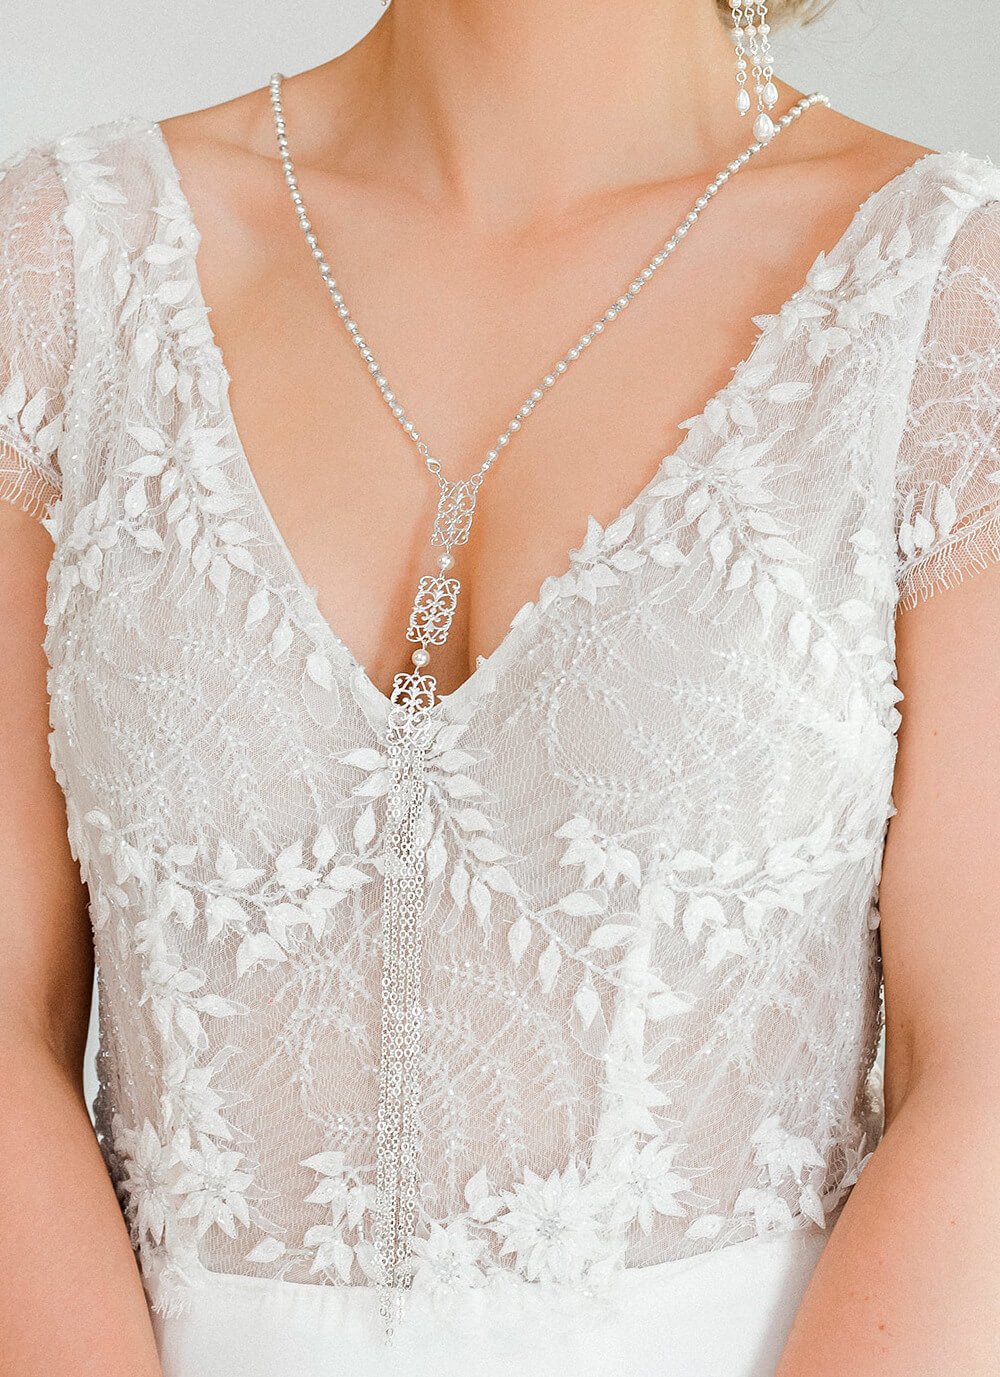 Silver Ember Bridal Backdrop Necklace on front